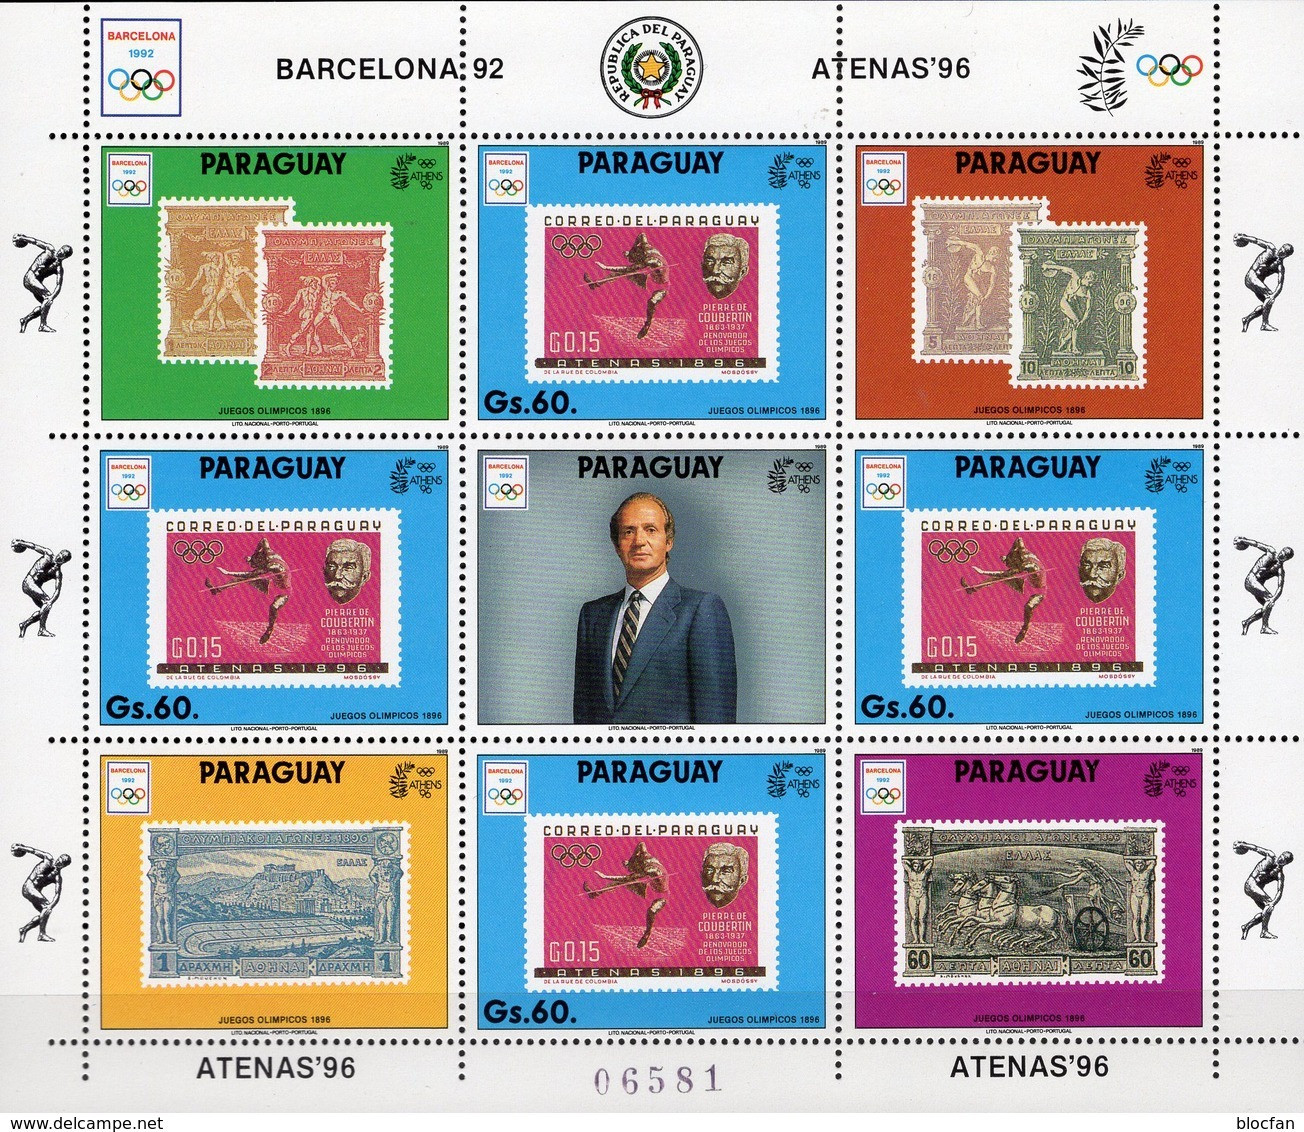 Olympia Athen 1896 Paraguay 4449 9-KB ** 36€ Barcelona 1992 Stamp On Stamps M/s Hoja Bloc Sheet Ss Sheetlet Bf Olympics - Sommer 1896: Athen